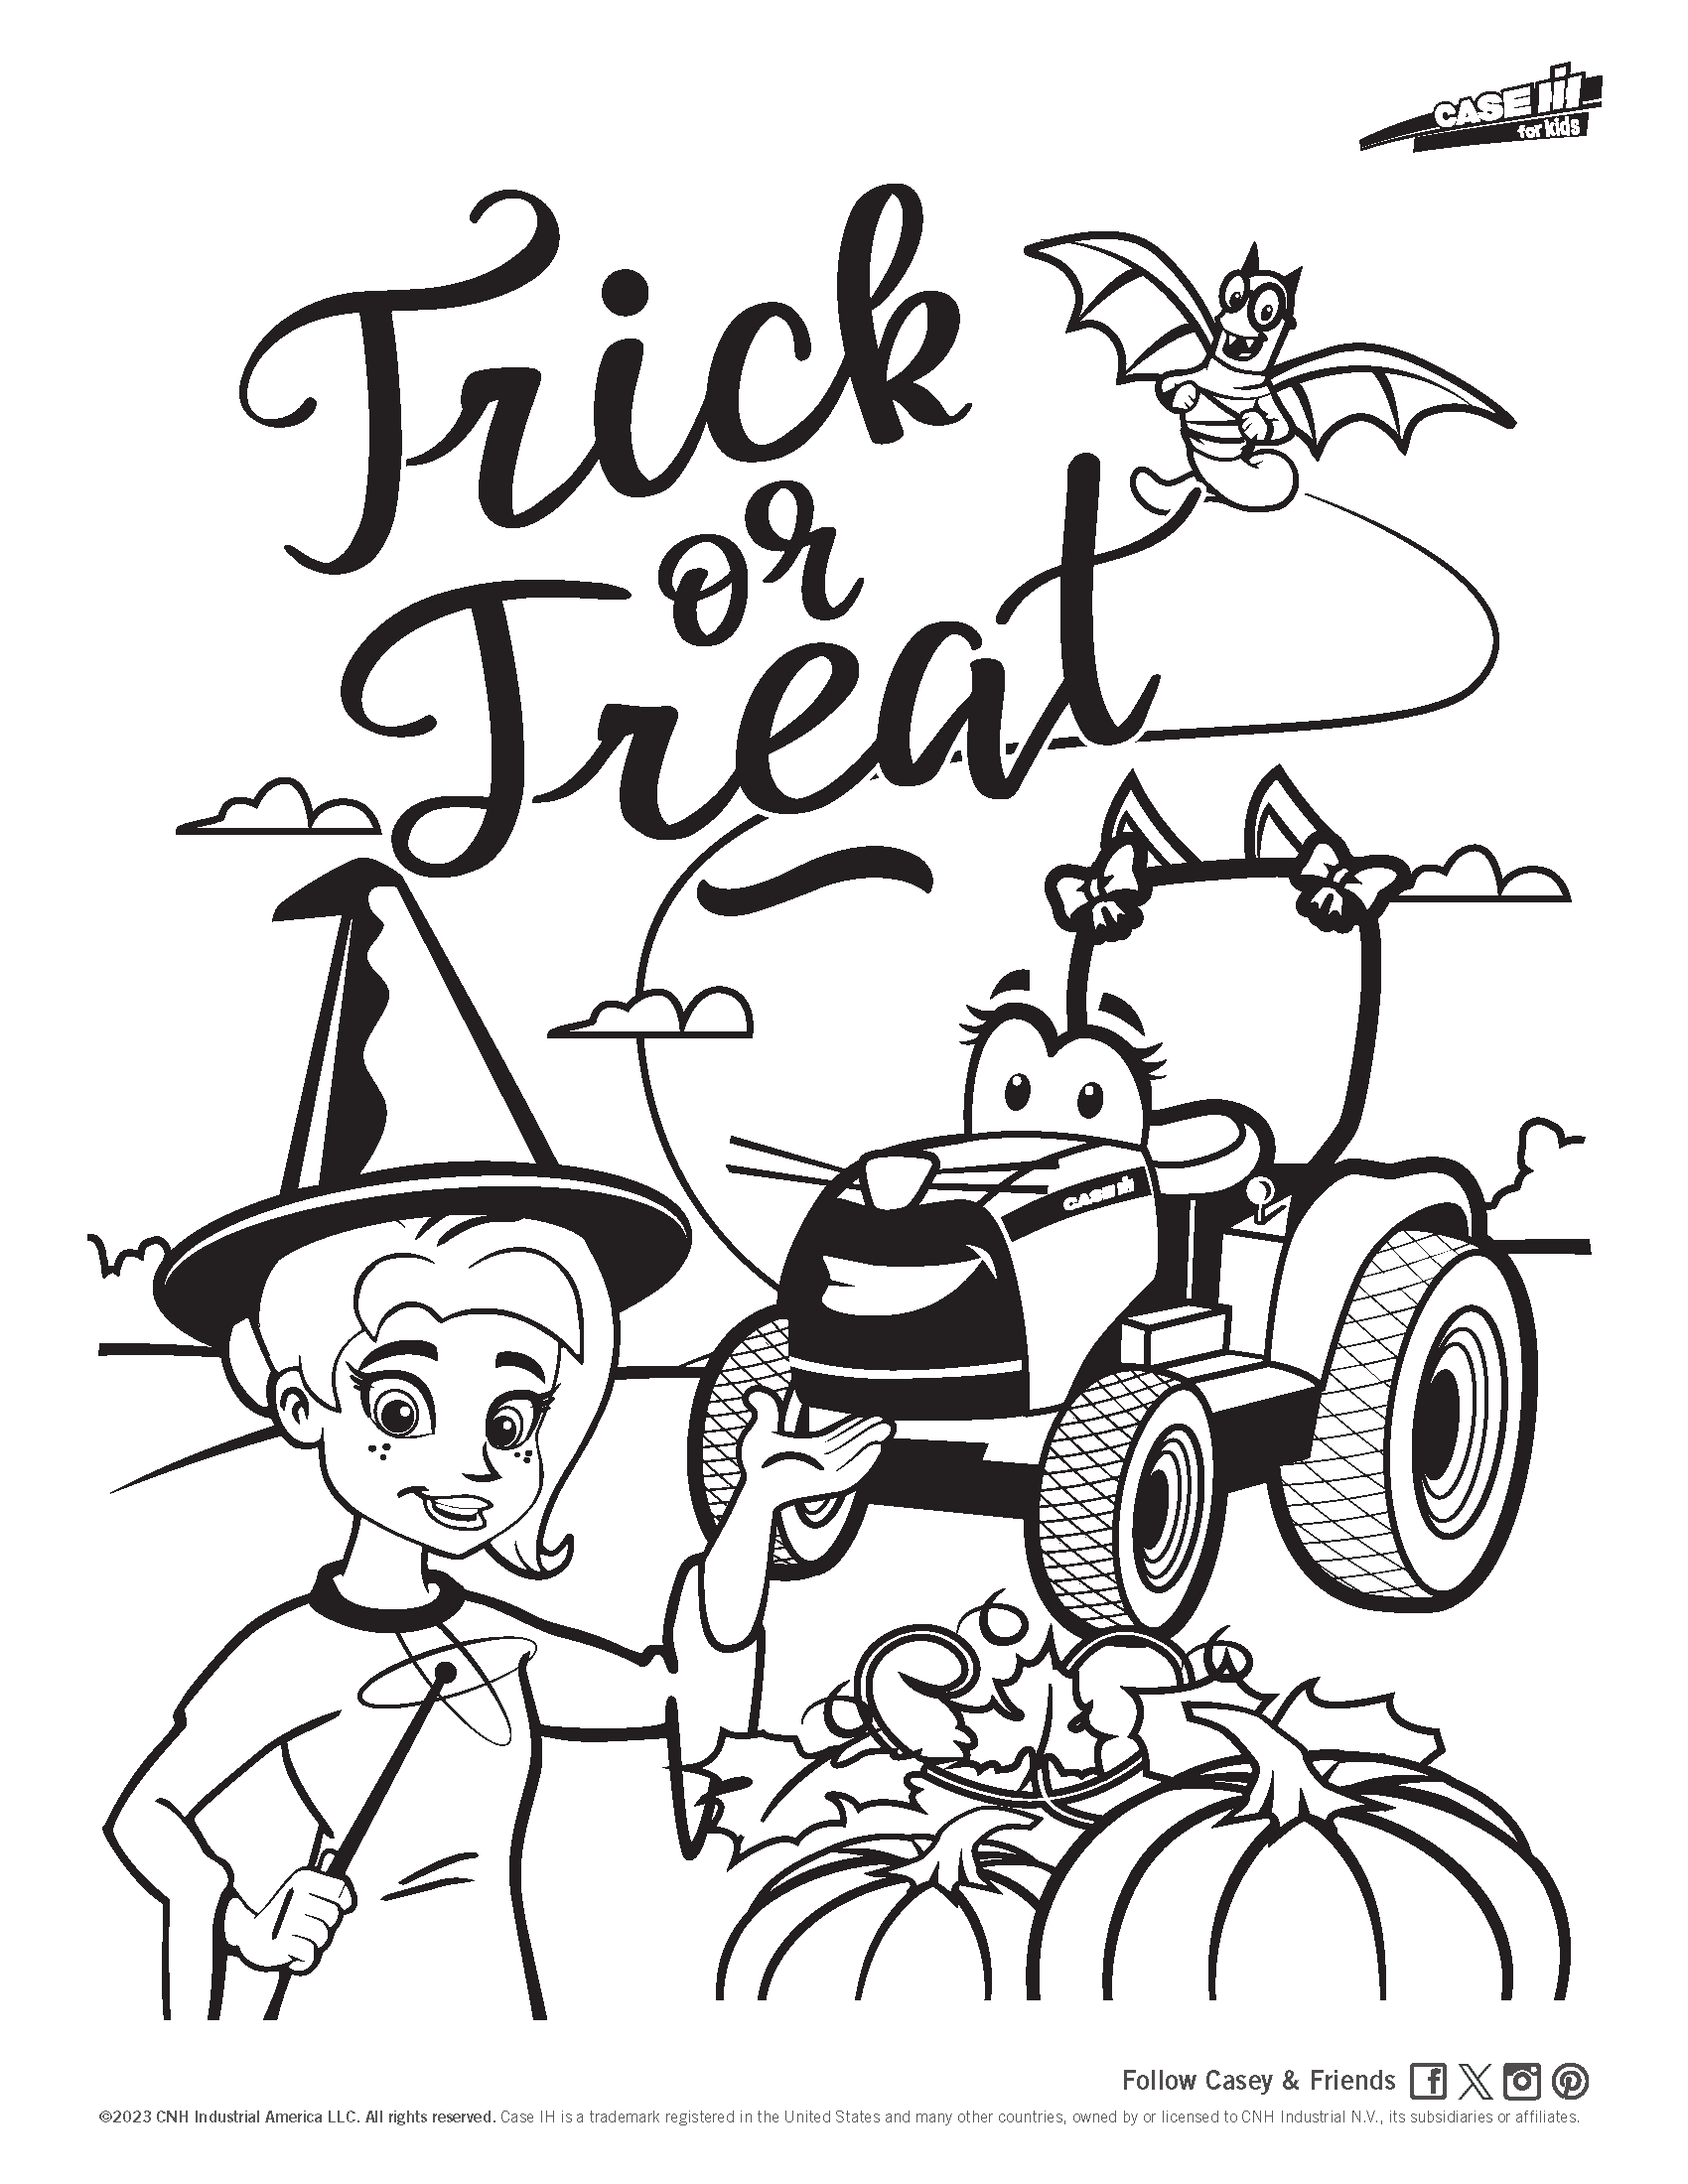 Casey_and_Friends_Halloween_Coloring_Page_1.png